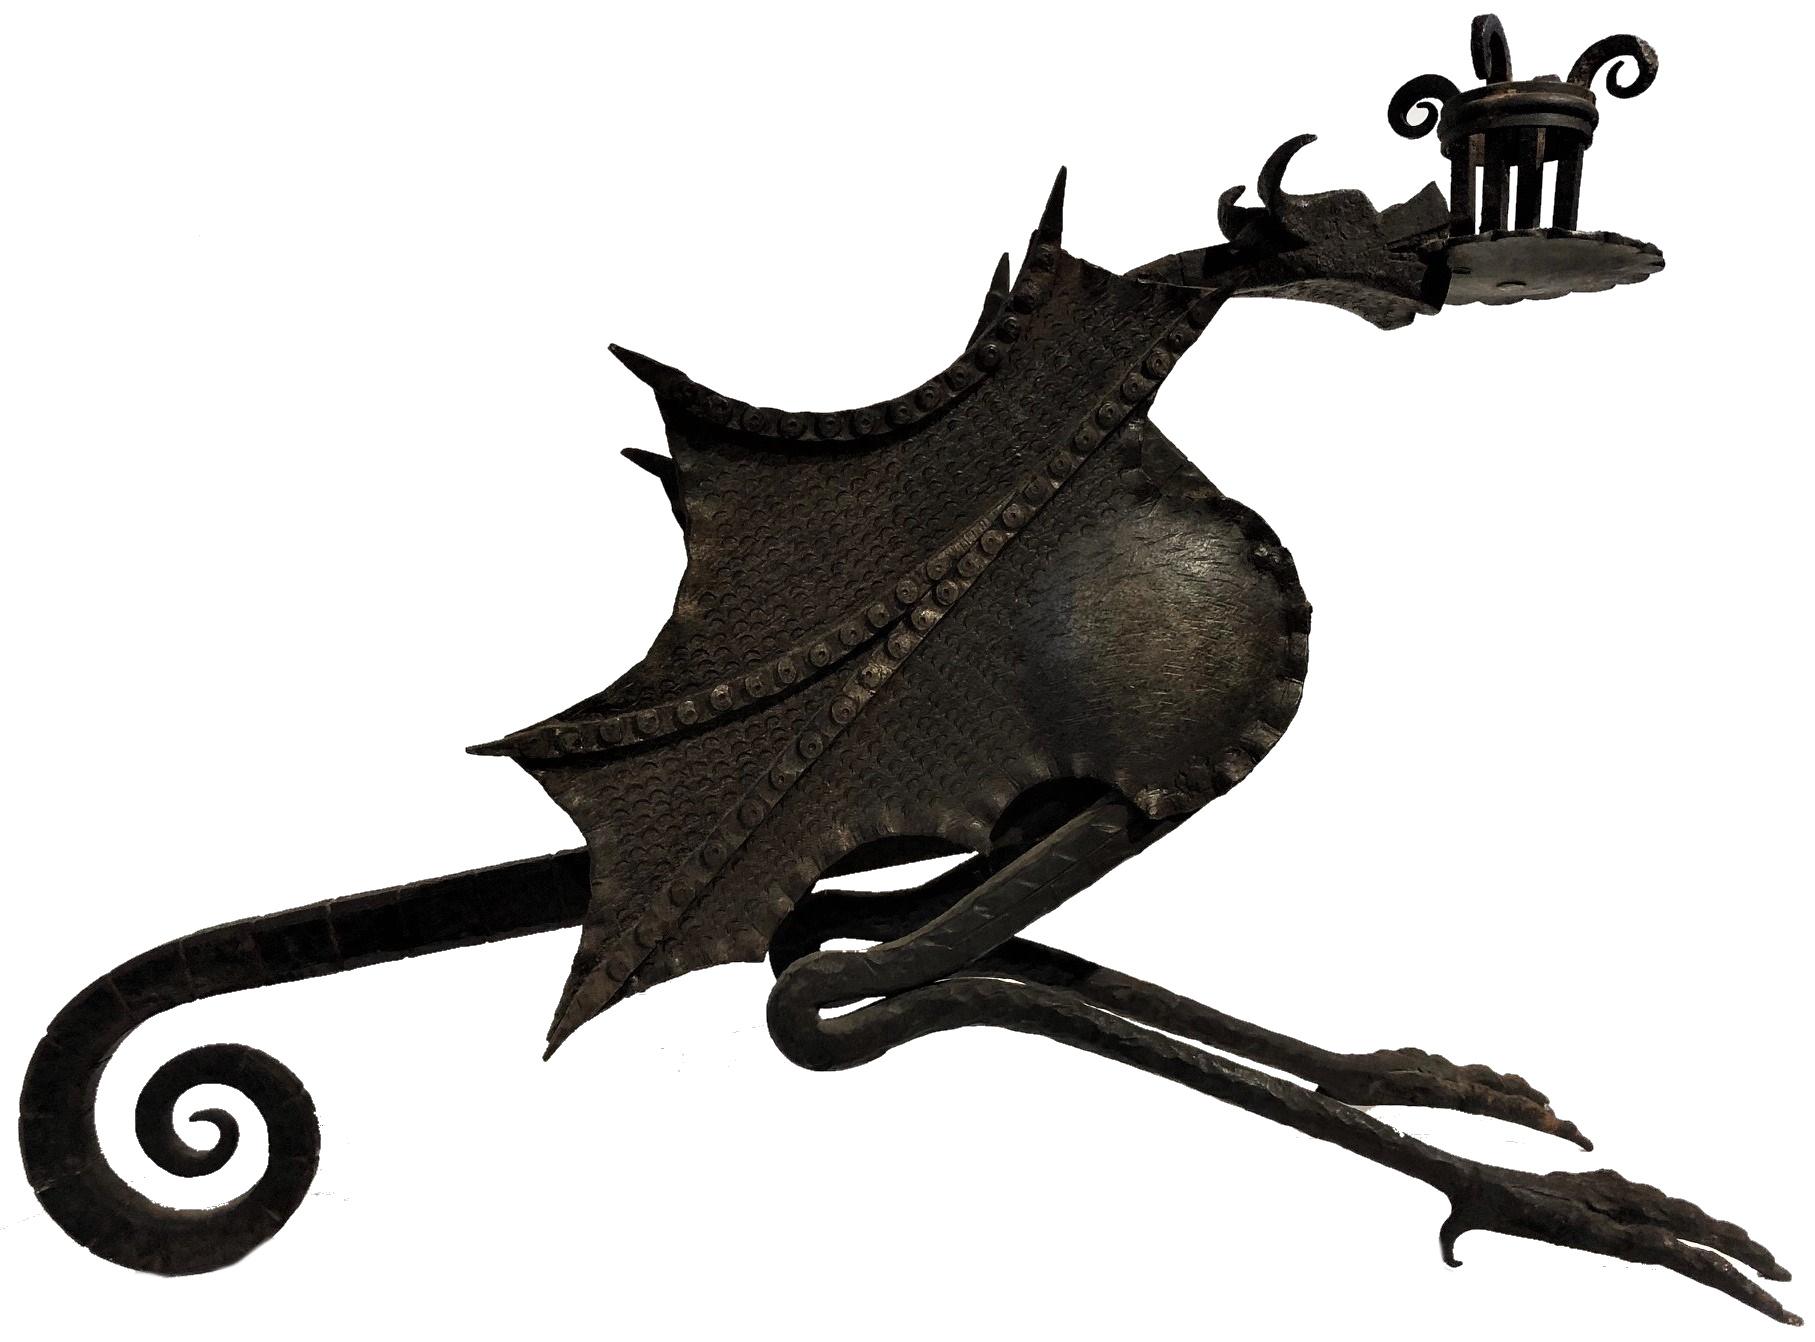 Antique
Candle Holder in form of a Dragon
Wrought Iron
Italy, XIX Century

ABOUT
This unique and really whimsical wrought iron candle holder in the form of a stylized dragon immediately evokes in the spectator a direct associations with the Middle